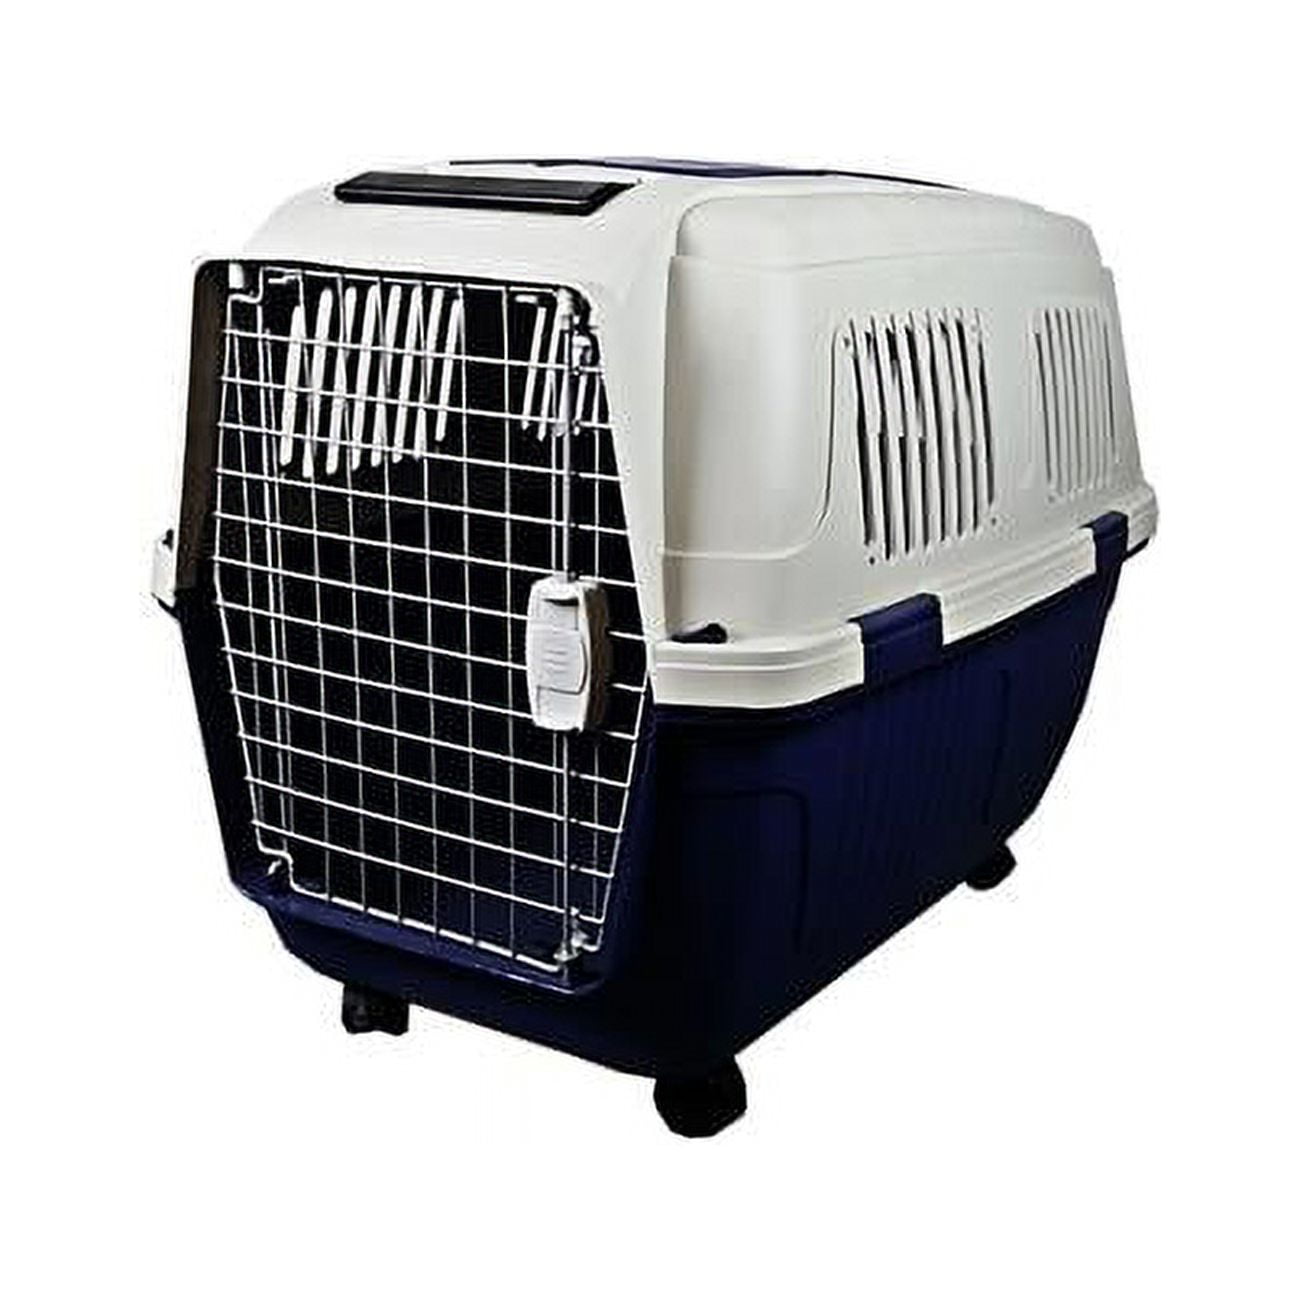 Cd8 Assorted 40 X 29 X 30 In. Deluxe Pet Carriers, Assorted Color